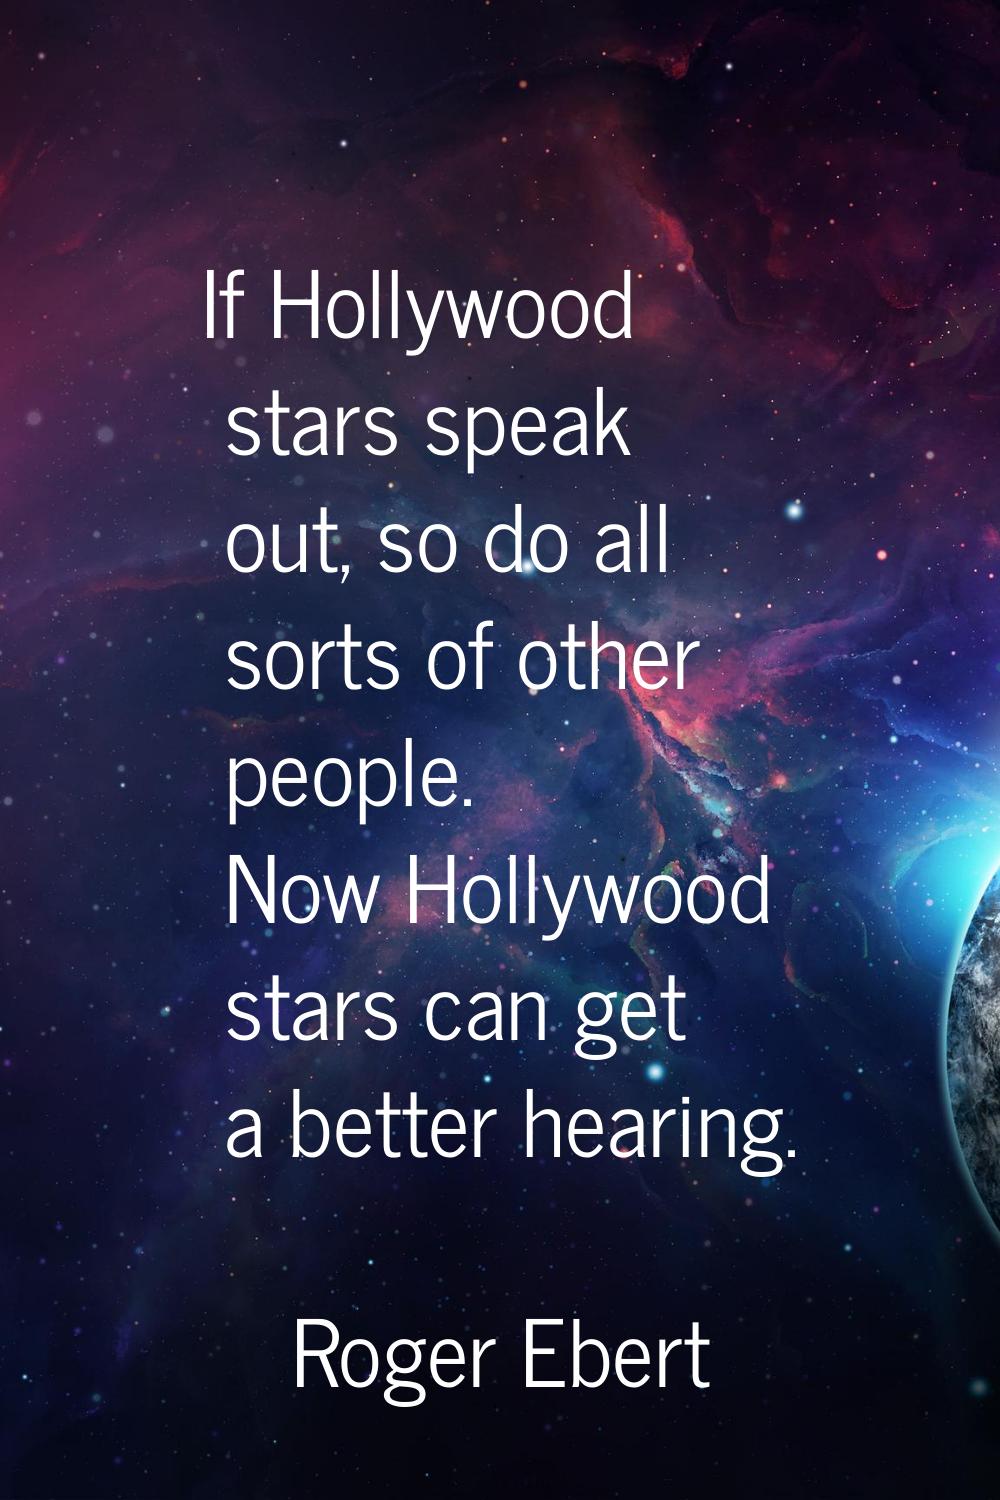 If Hollywood stars speak out, so do all sorts of other people. Now Hollywood stars can get a better